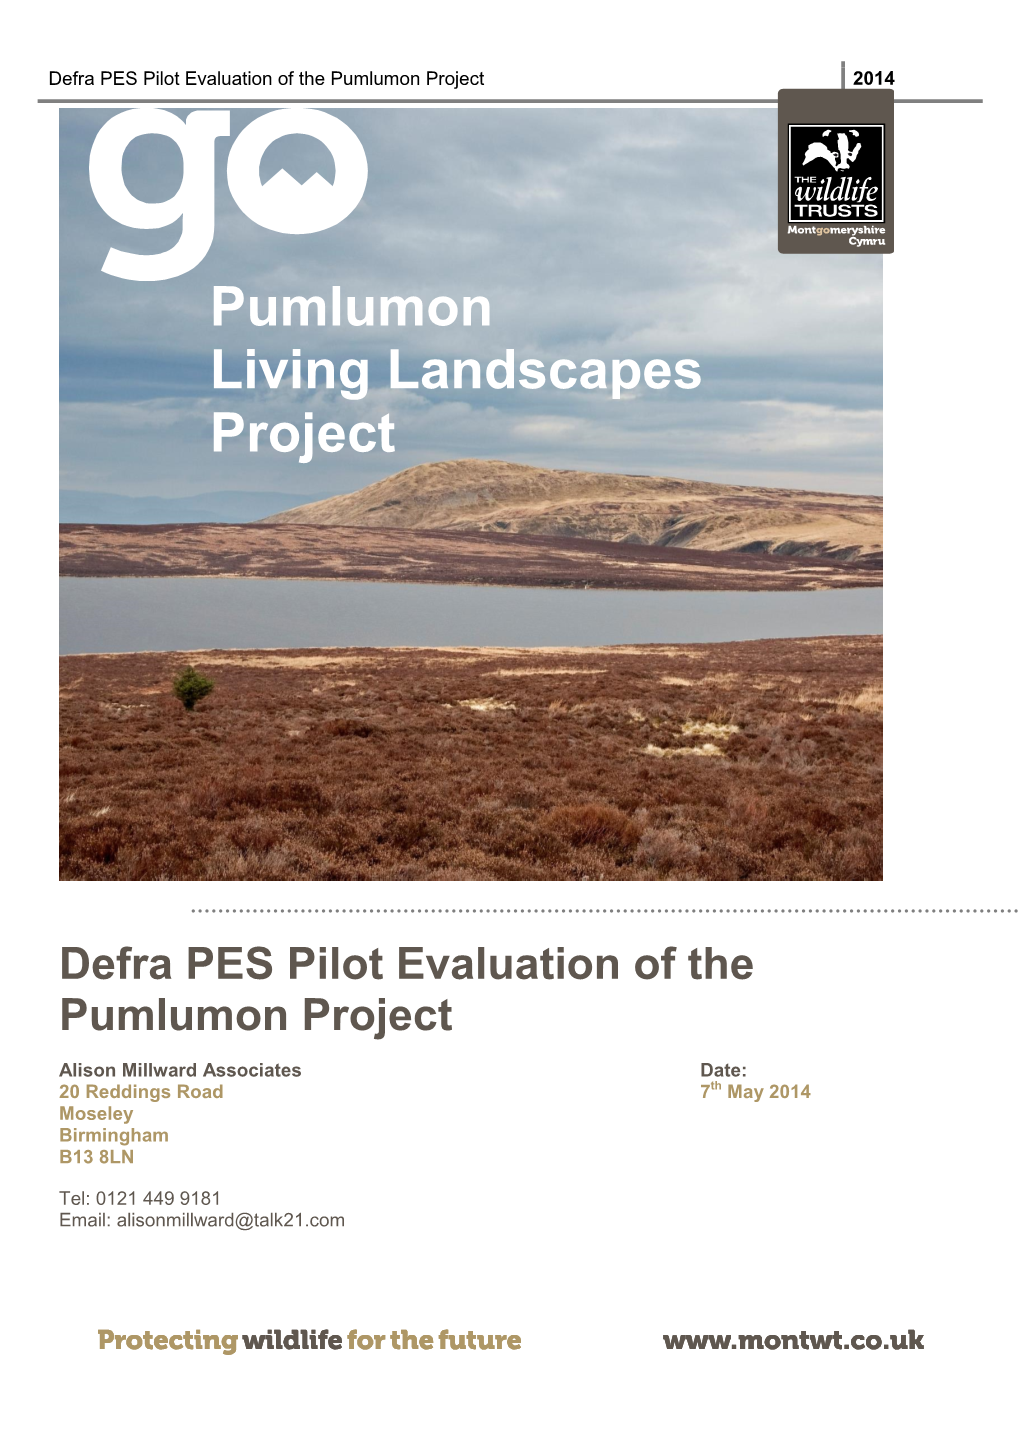 Defra PES Pilot Evaluation of the Pumlumon Project 2014